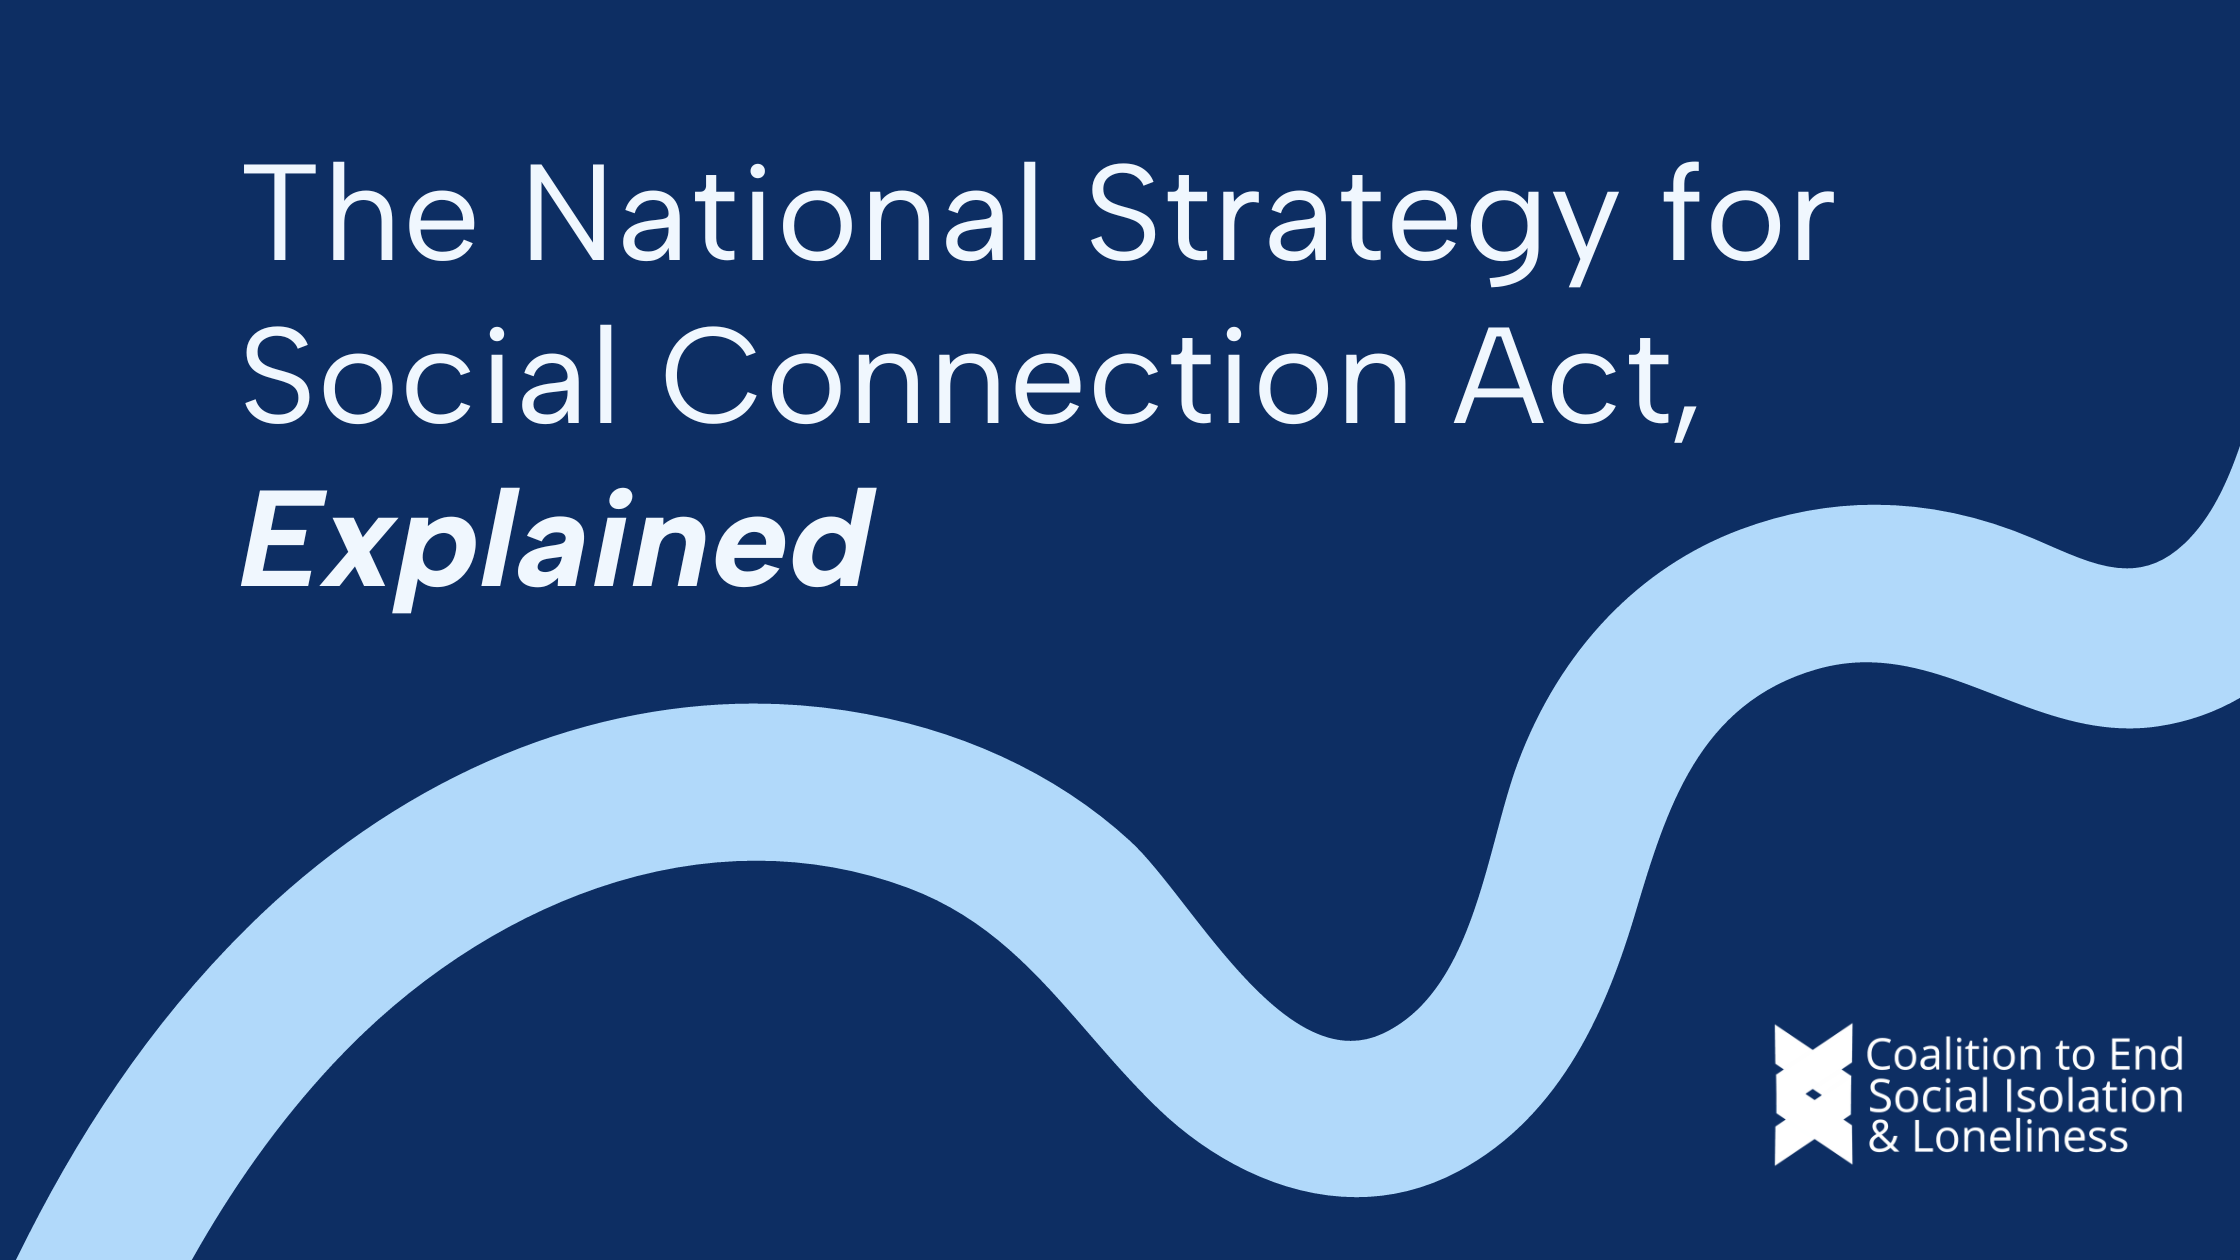 The National Strategy for Social Connection Act, Explained